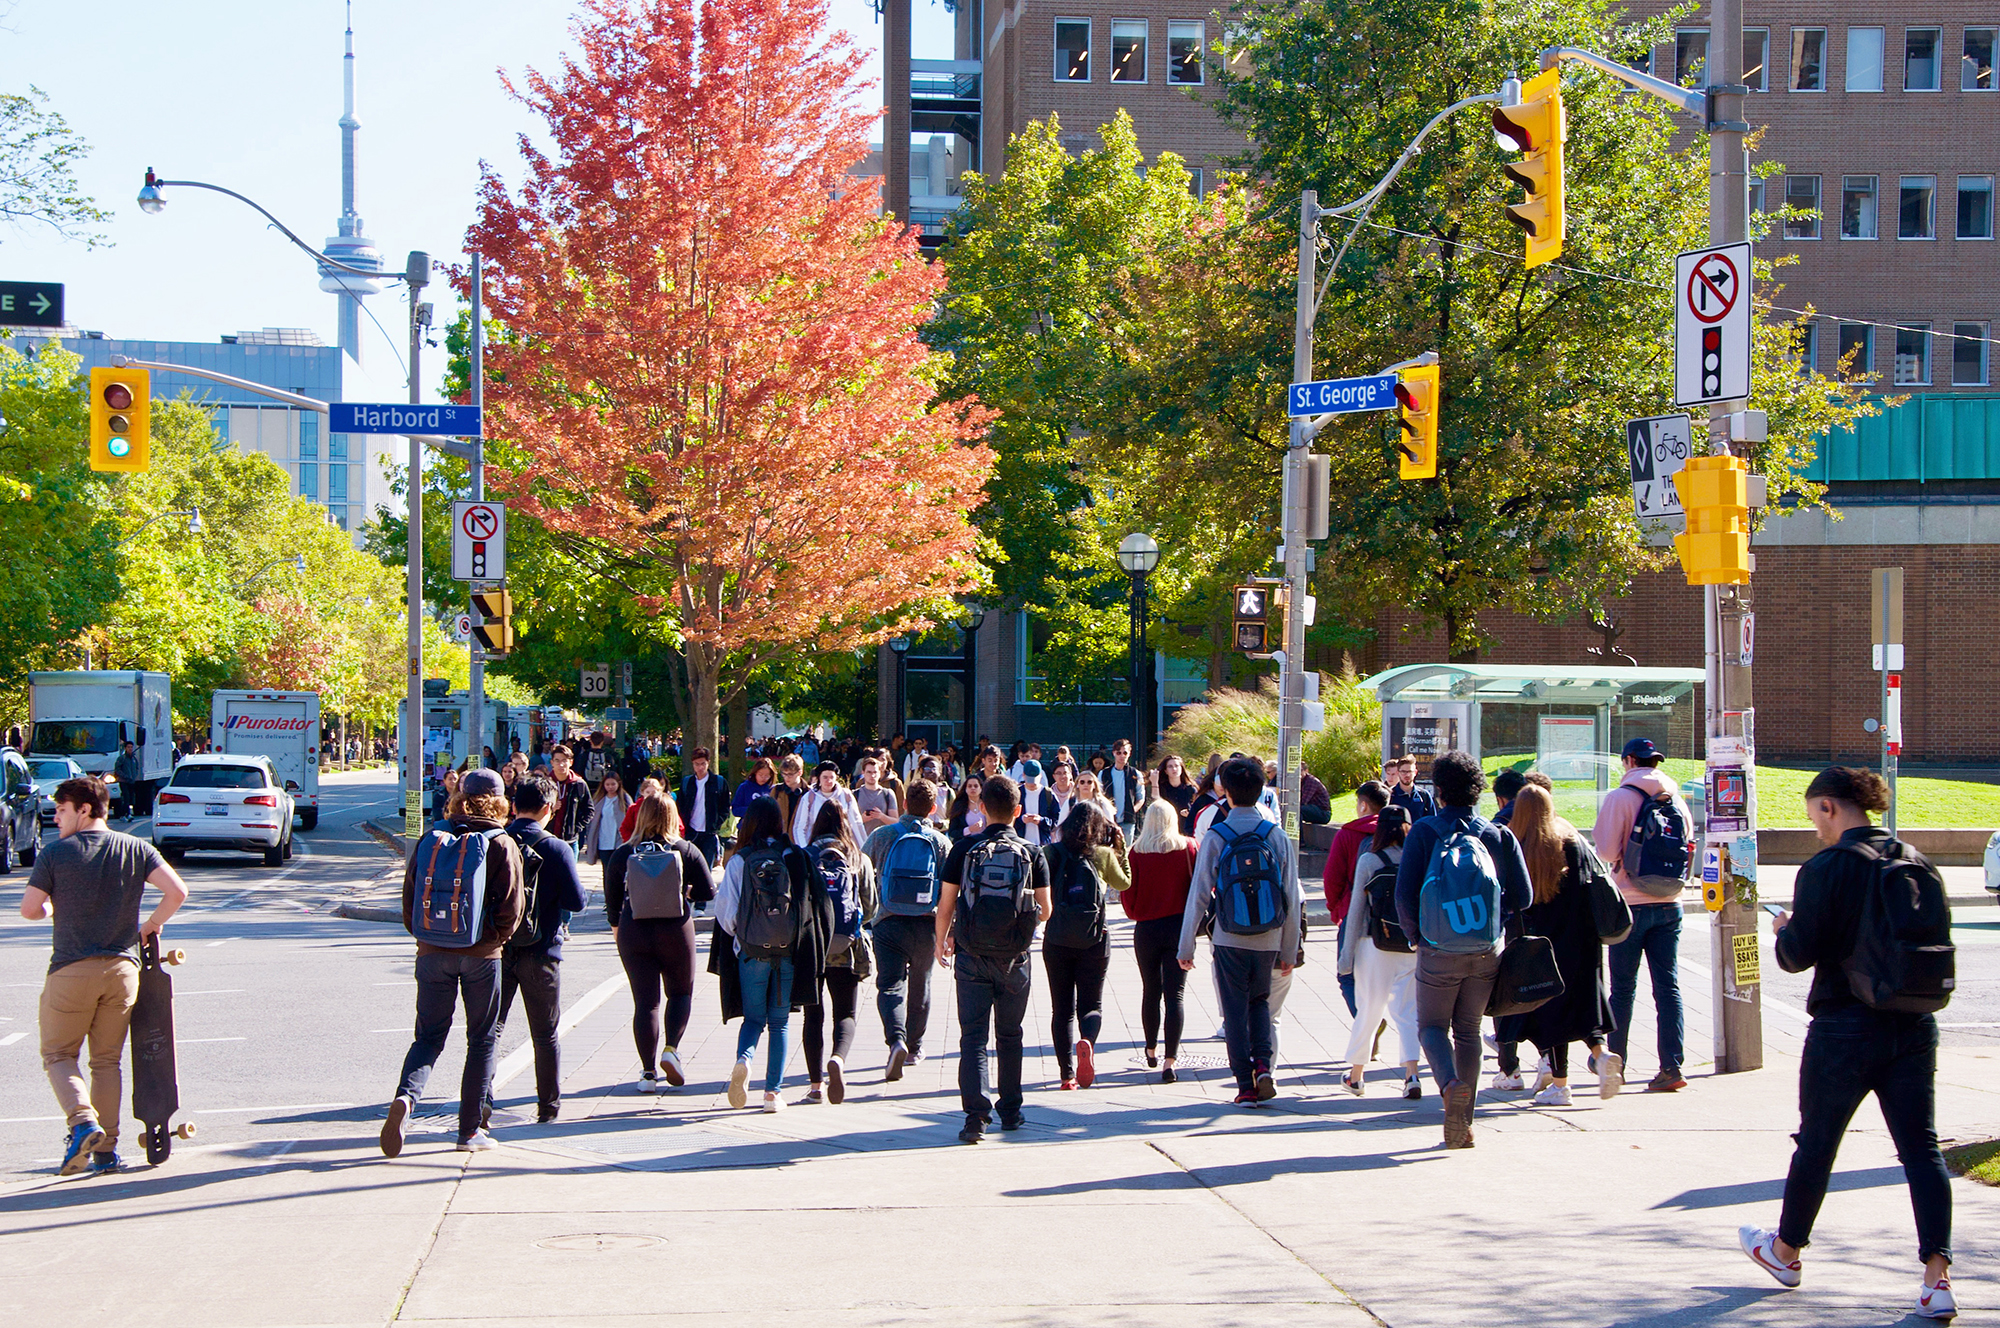 Students at the intersection of St. George and Harbord streets.